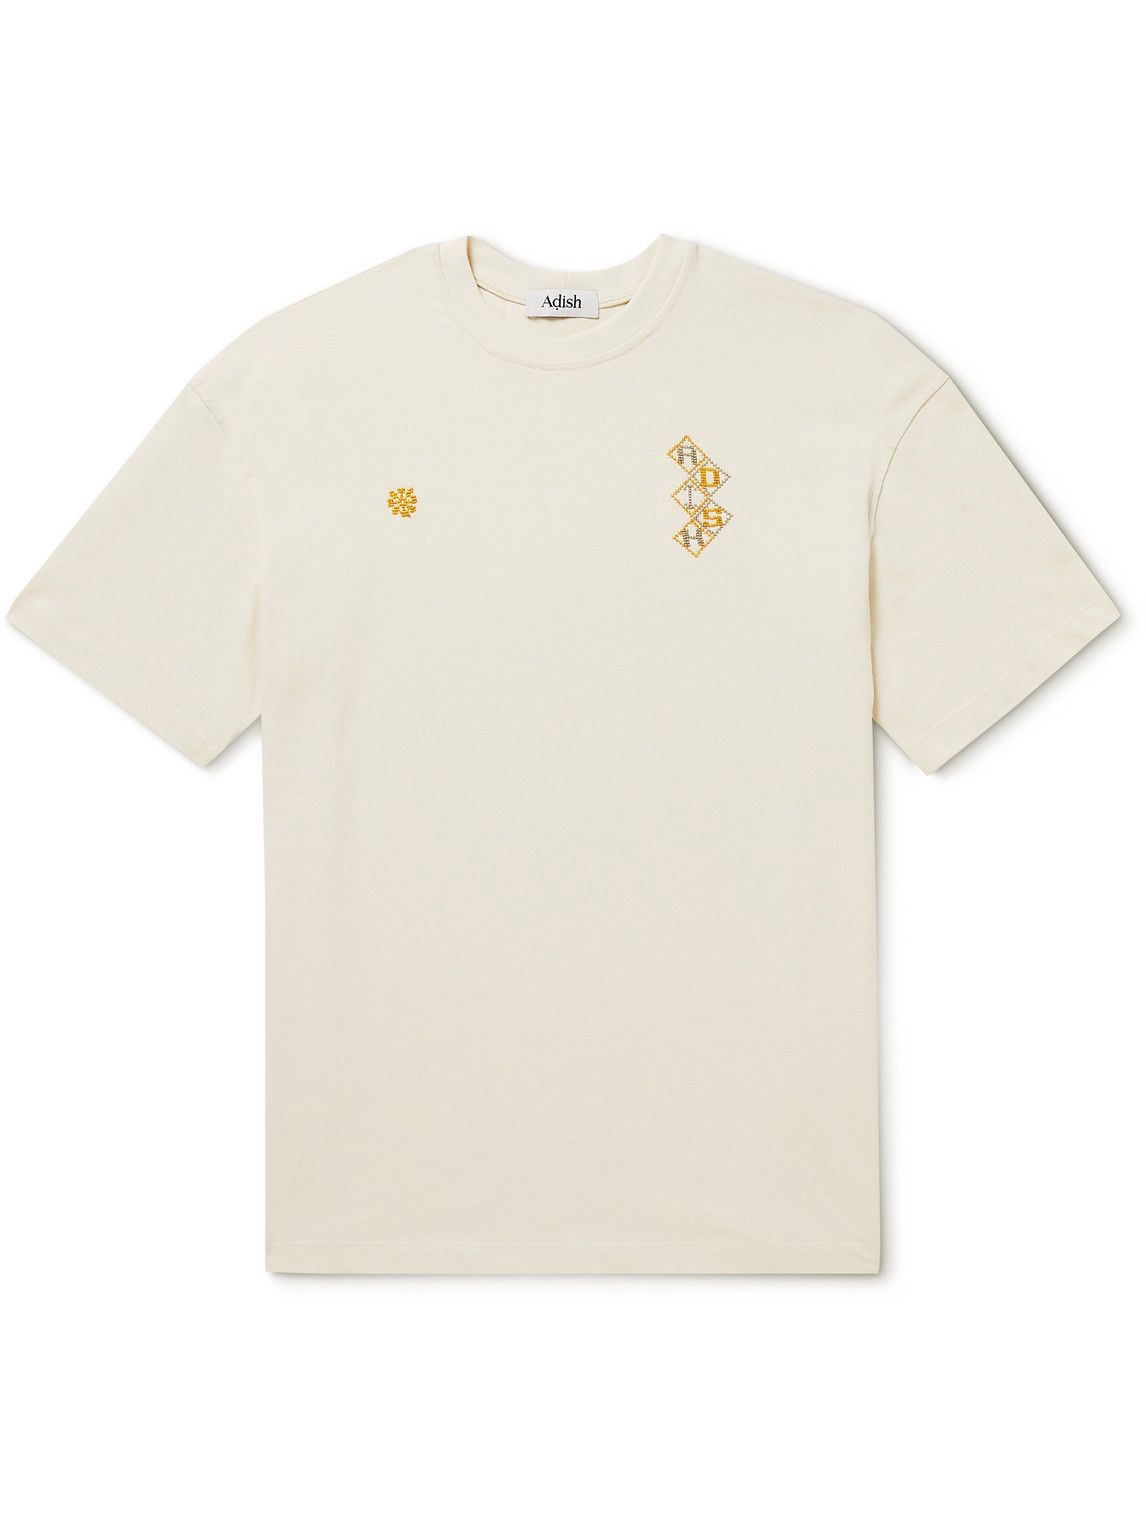 Palace x Gucci Printed Heavy Cotton Jersey T-shirt WhitePalace x Gucci  Printed Heavy Cotton Jersey T-shirt White - OFour